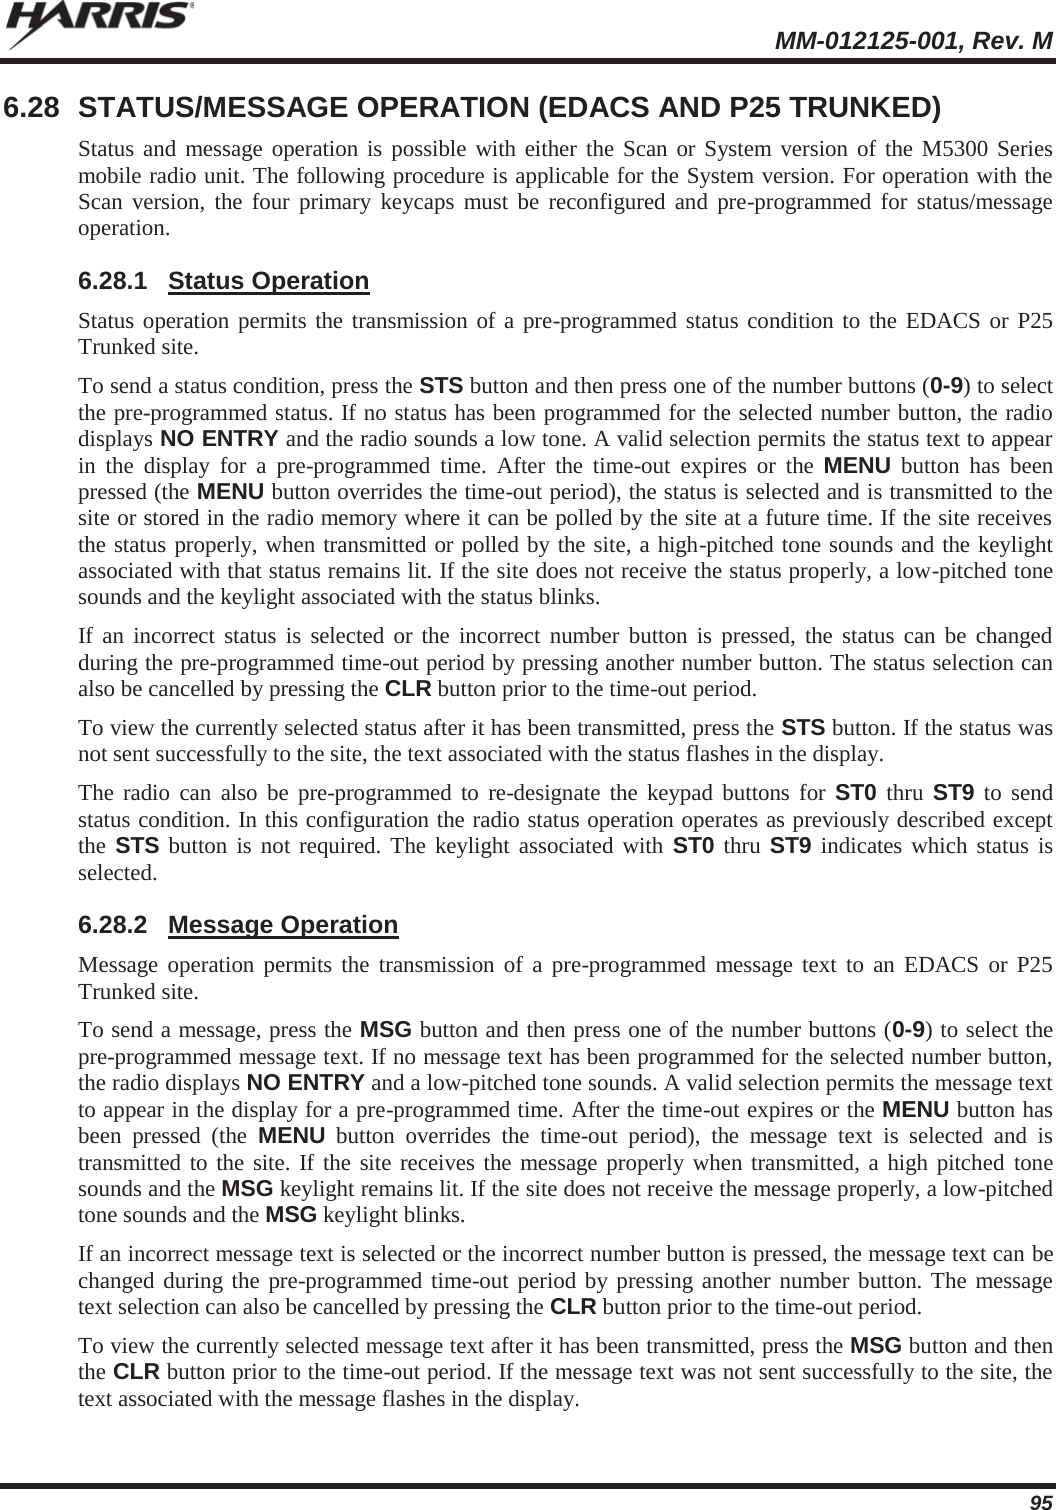  MM-012125-001, Rev. M 95 6.28  STATUS/MESSAGE OPERATION (EDACS AND P25 TRUNKED) Status and message operation is possible with either the Scan or System version of the M5300 Series mobile radio unit. The following procedure is applicable for the System version. For operation with the Scan version, the four primary keycaps must be reconfigured and pre-programmed for status/message operation. 6.28.1 Status Operation Status operation permits the transmission of a pre-programmed status condition to the EDACS or P25 Trunked site. To send a status condition, press the STS button and then press one of the number buttons (0-9) to select the pre-programmed status. If no status has been programmed for the selected number button, the radio displays NO ENTRY and the radio sounds a low tone. A valid selection permits the status text to appear in the display for a pre-programmed time. After the time-out expires or the MENU button has been pressed (the MENU button overrides the time-out period), the status is selected and is transmitted to the site or stored in the radio memory where it can be polled by the site at a future time. If the site receives the status properly, when transmitted or polled by the site, a high-pitched tone sounds and the keylight associated with that status remains lit. If the site does not receive the status properly, a low-pitched tone sounds and the keylight associated with the status blinks. If an incorrect status is selected or the incorrect number button is pressed, the status can be changed during the pre-programmed time-out period by pressing another number button. The status selection can also be cancelled by pressing the CLR button prior to the time-out period. To view the currently selected status after it has been transmitted, press the STS button. If the status was not sent successfully to the site, the text associated with the status flashes in the display. The radio can also be pre-programmed to re-designate the keypad buttons for ST0 thru ST9 to send status condition. In this configuration the radio status operation operates as previously described except the STS button is not required. The keylight associated with ST0 thru ST9 indicates which status is selected. 6.28.2 Message Operation Message operation permits the transmission of a pre-programmed message text to an EDACS or P25 Trunked site. To send a message, press the MSG button and then press one of the number buttons (0-9) to select the pre-programmed message text. If no message text has been programmed for the selected number button, the radio displays NO ENTRY and a low-pitched tone sounds. A valid selection permits the message text to appear in the display for a pre-programmed time. After the time-out expires or the MENU button has been pressed (the MENU button overrides the time-out period), the message text is selected and is transmitted to the site. If the site receives the message properly when transmitted, a high pitched tone sounds and the MSG keylight remains lit. If the site does not receive the message properly, a low-pitched tone sounds and the MSG keylight blinks. If an incorrect message text is selected or the incorrect number button is pressed, the message text can be changed during the pre-programmed time-out period by pressing another number button. The message text selection can also be cancelled by pressing the CLR button prior to the time-out period. To view the currently selected message text after it has been transmitted, press the MSG button and then the CLR button prior to the time-out period. If the message text was not sent successfully to the site, the text associated with the message flashes in the display. 